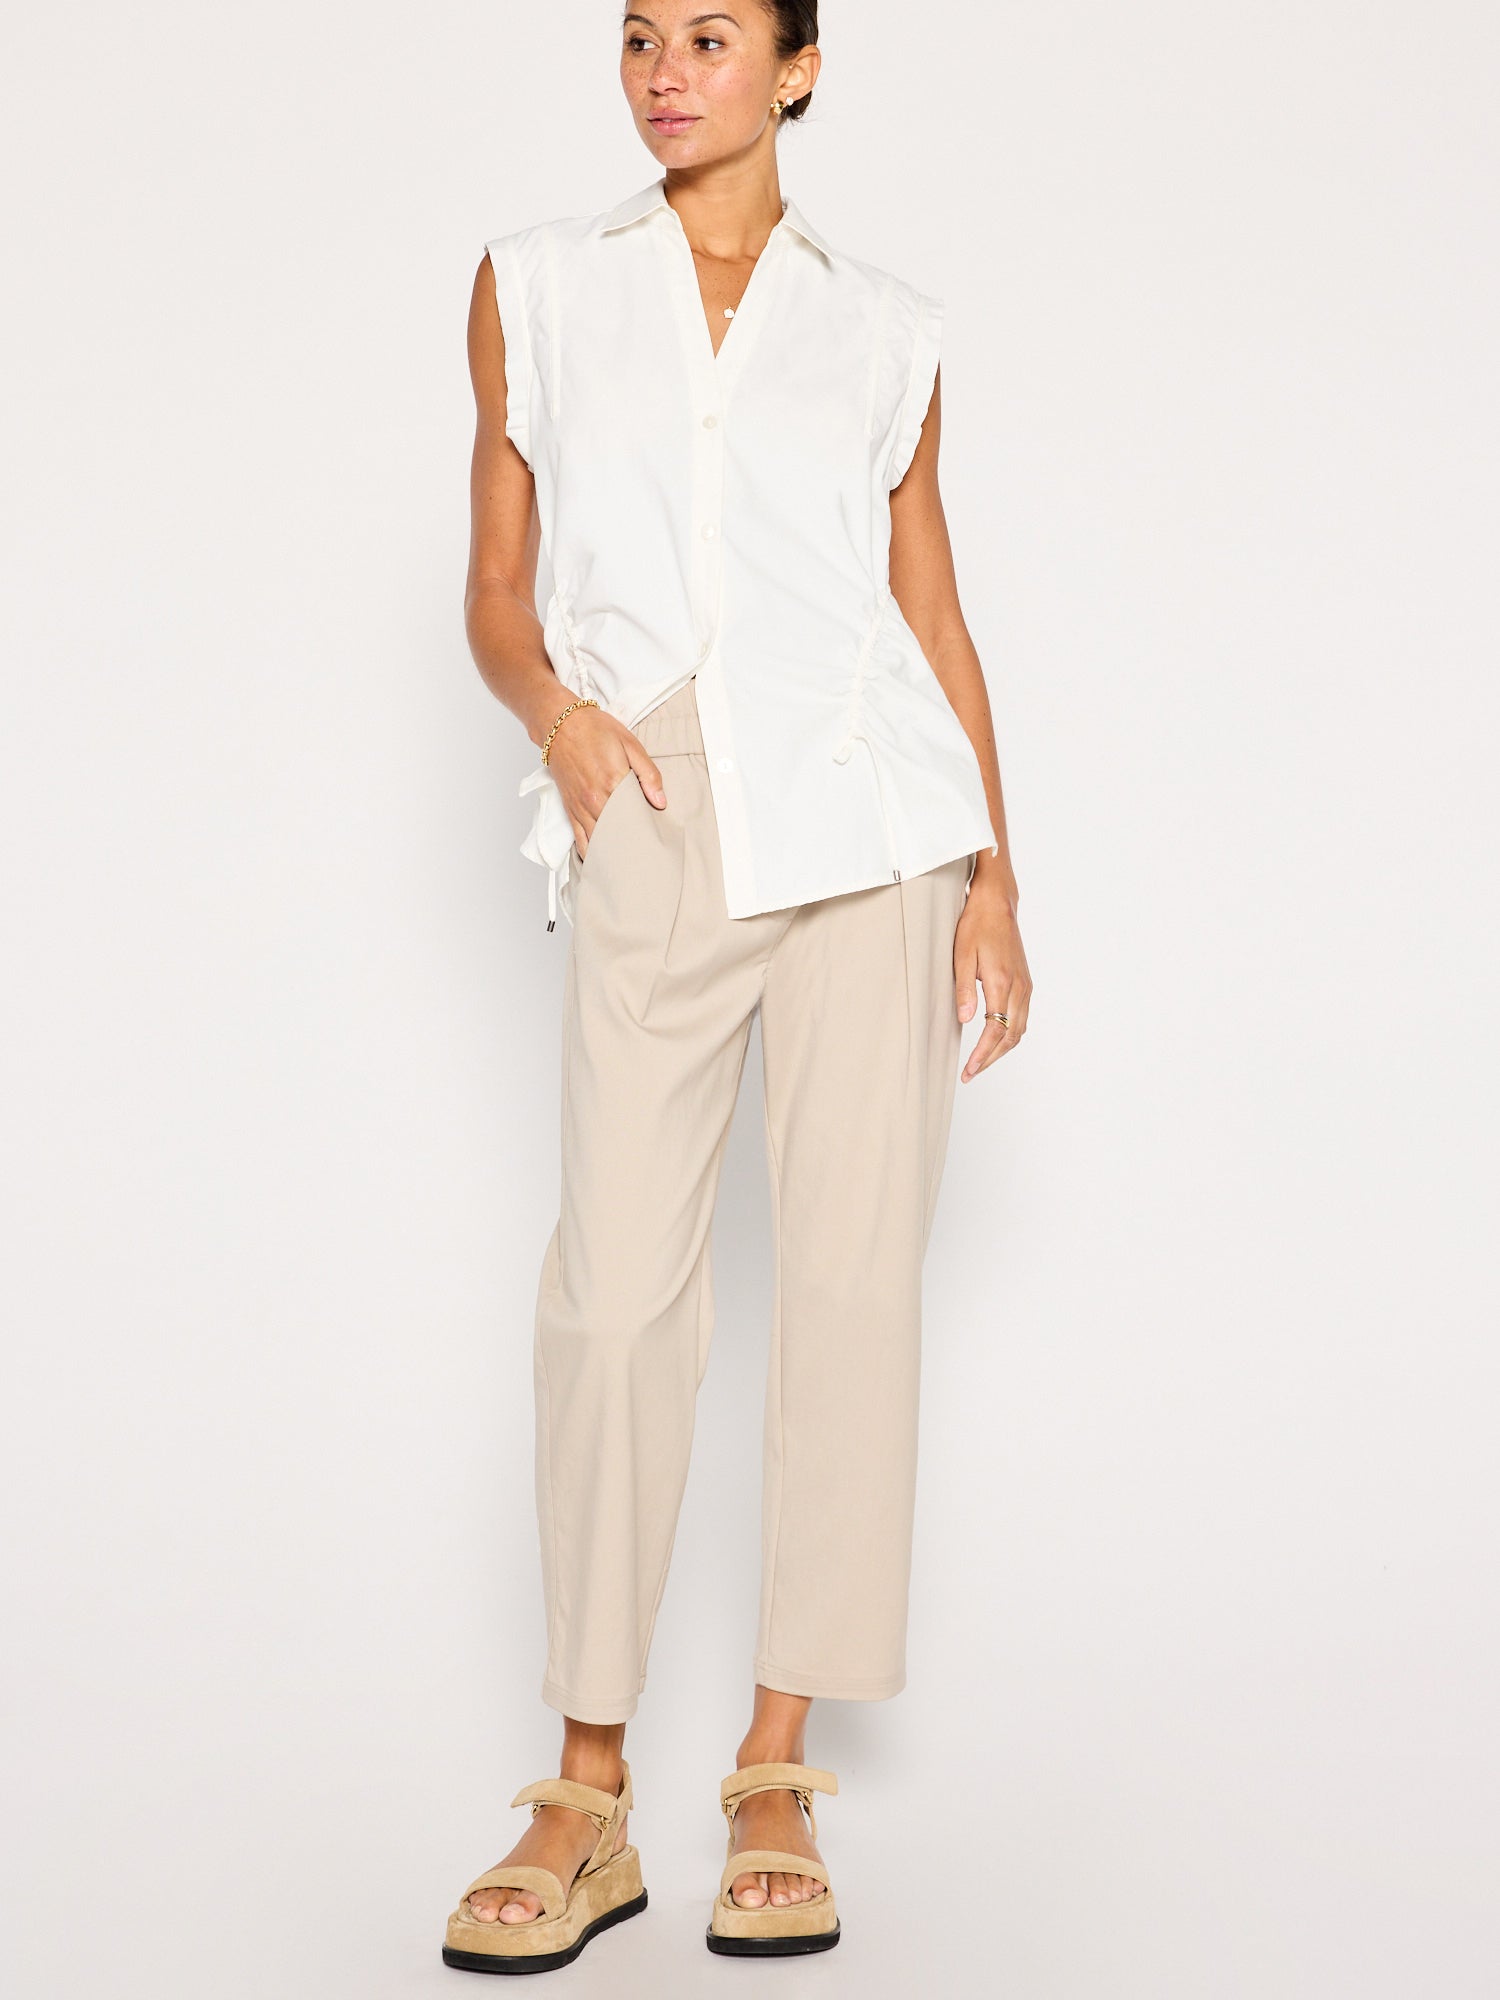 Marcie white sleeveless button up top full view